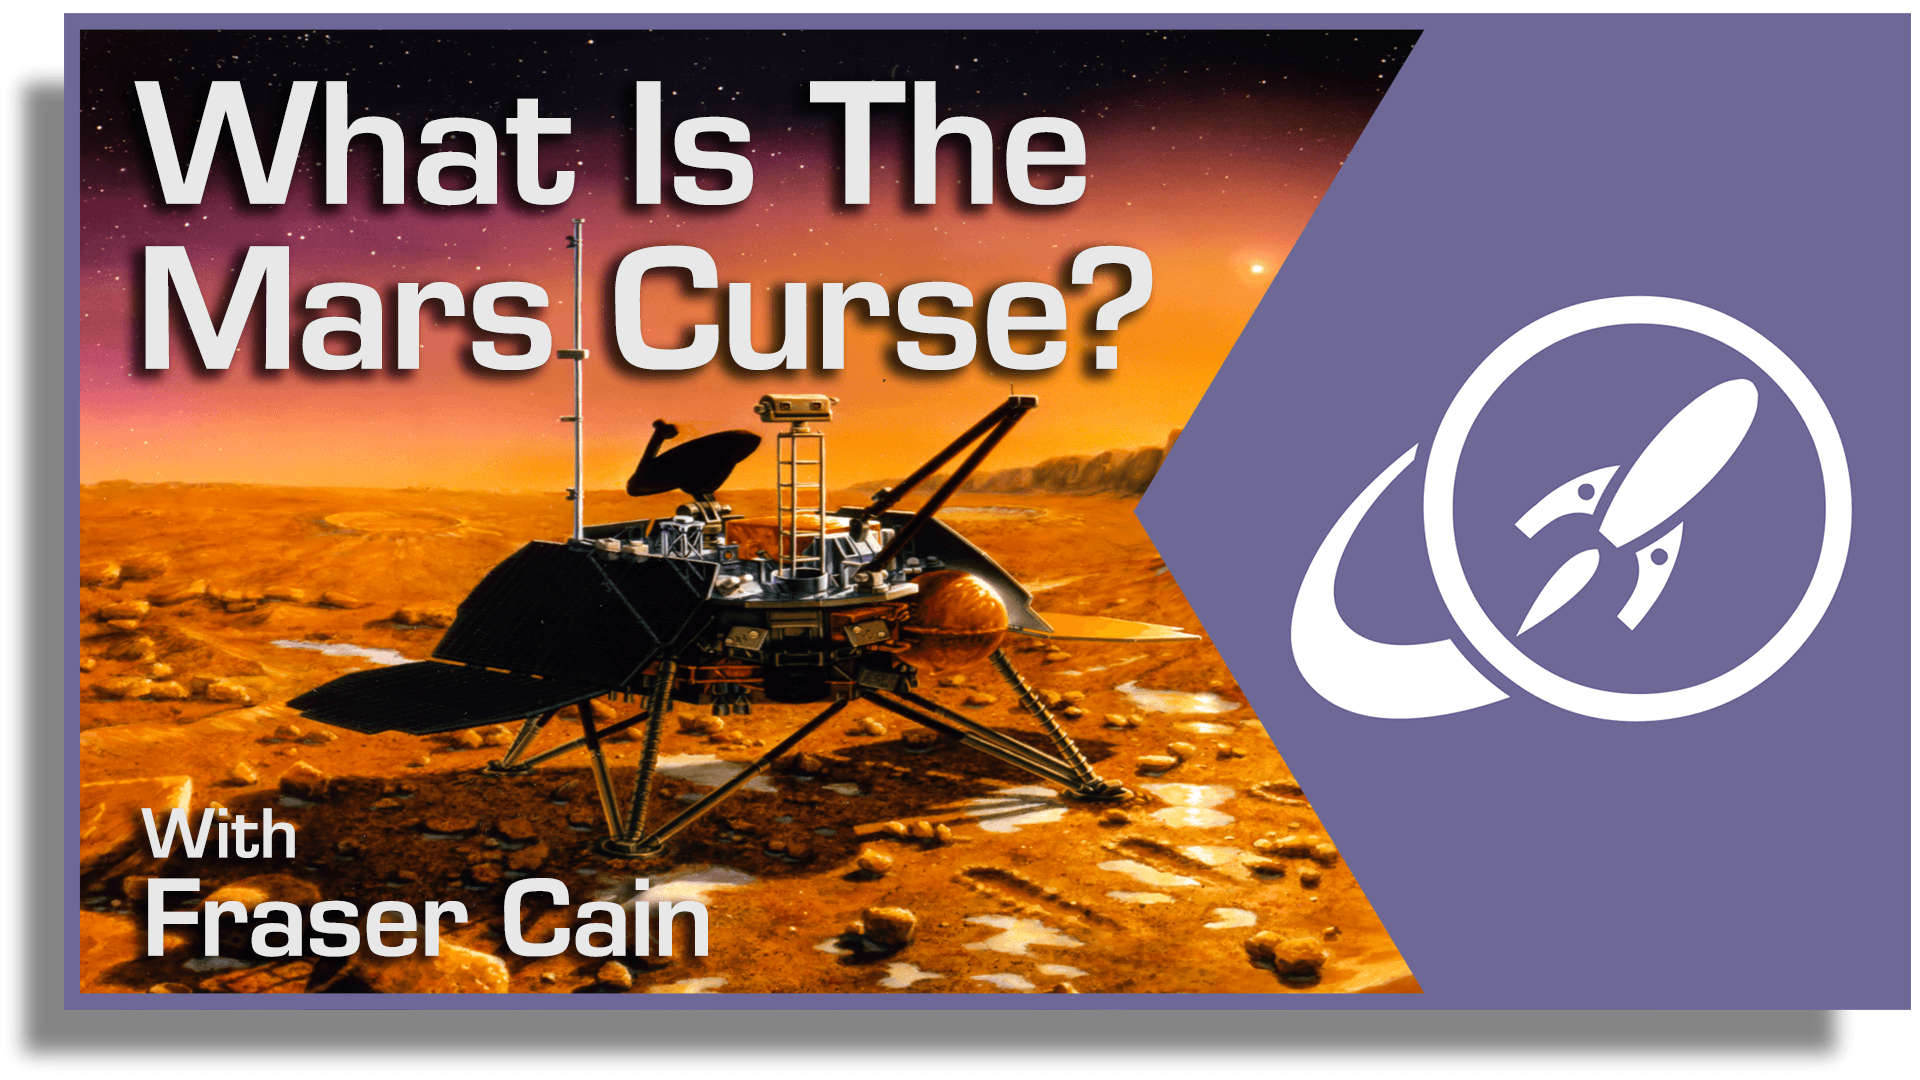 What is the Mars Curse?